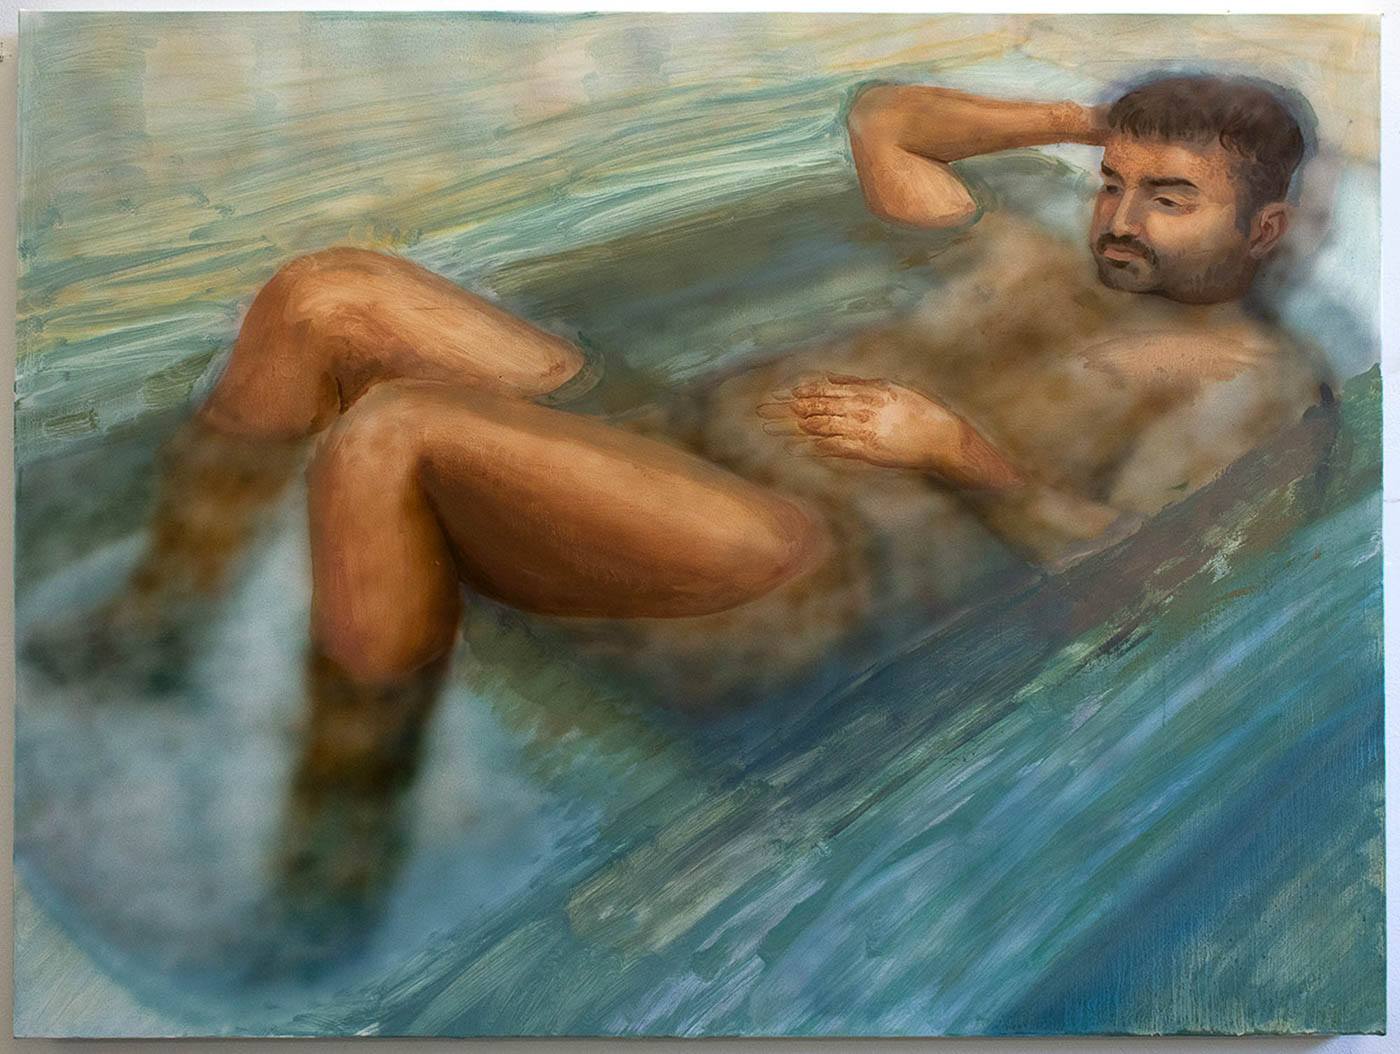 A painting of a person bathing